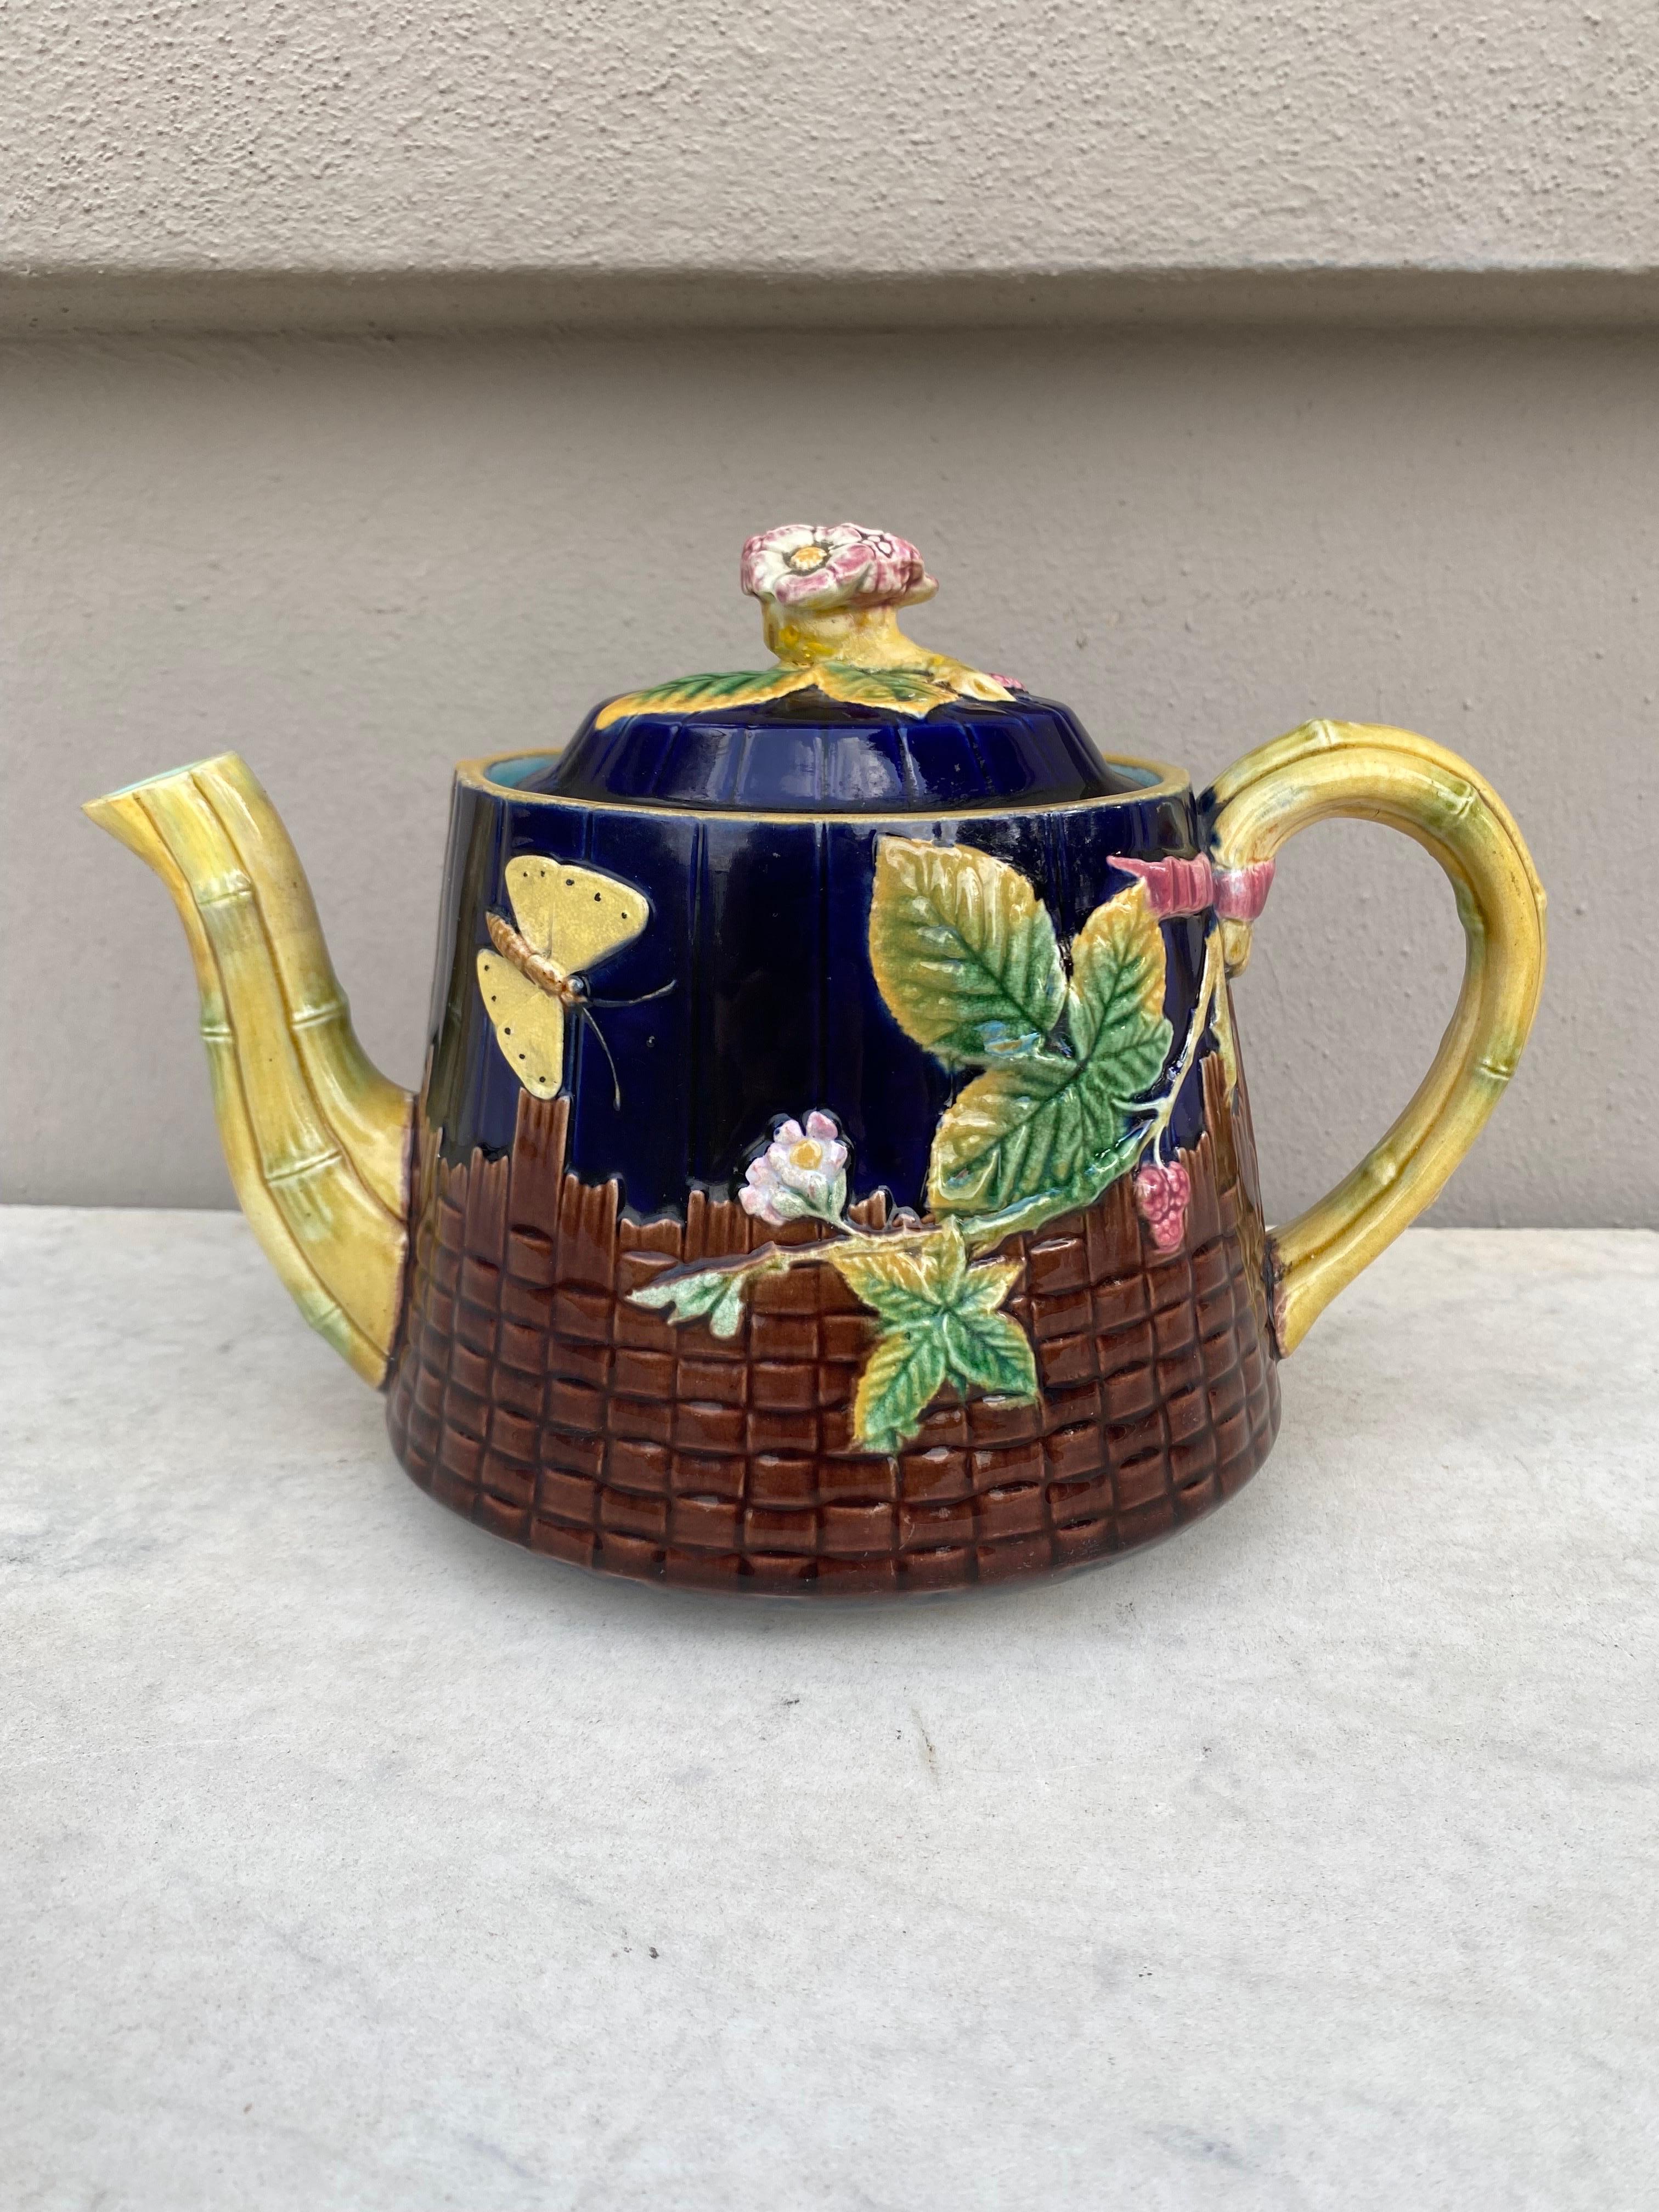 Rare Victorian Majolica Teapot signed Brown-Westhead, Moore & Co. 
Decorated with a butterfly, berries on a brown basketweave , and bamboo.
Flowers on the lid.
A very delicate lovely example of Victorian Majolica.